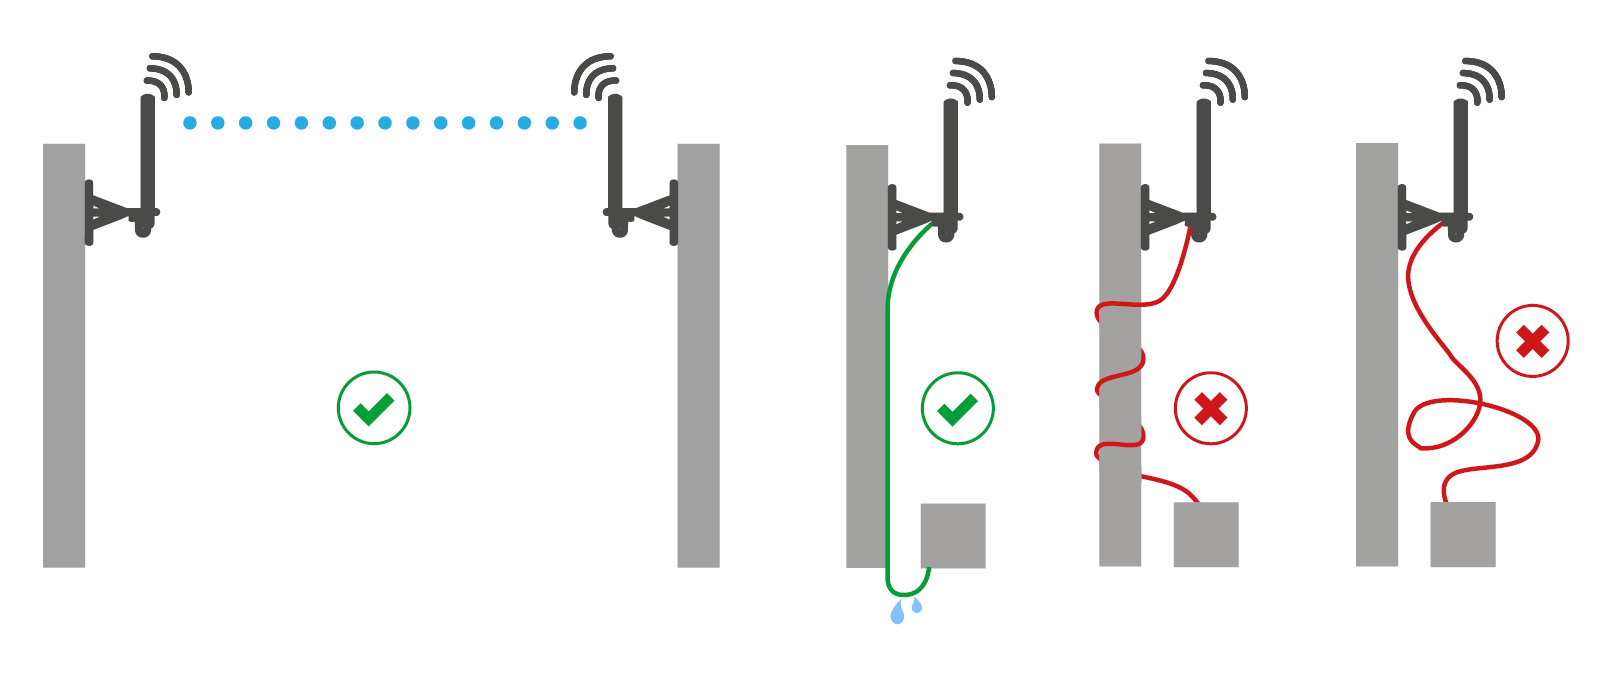 examples of correct and incorrect installation of antennas